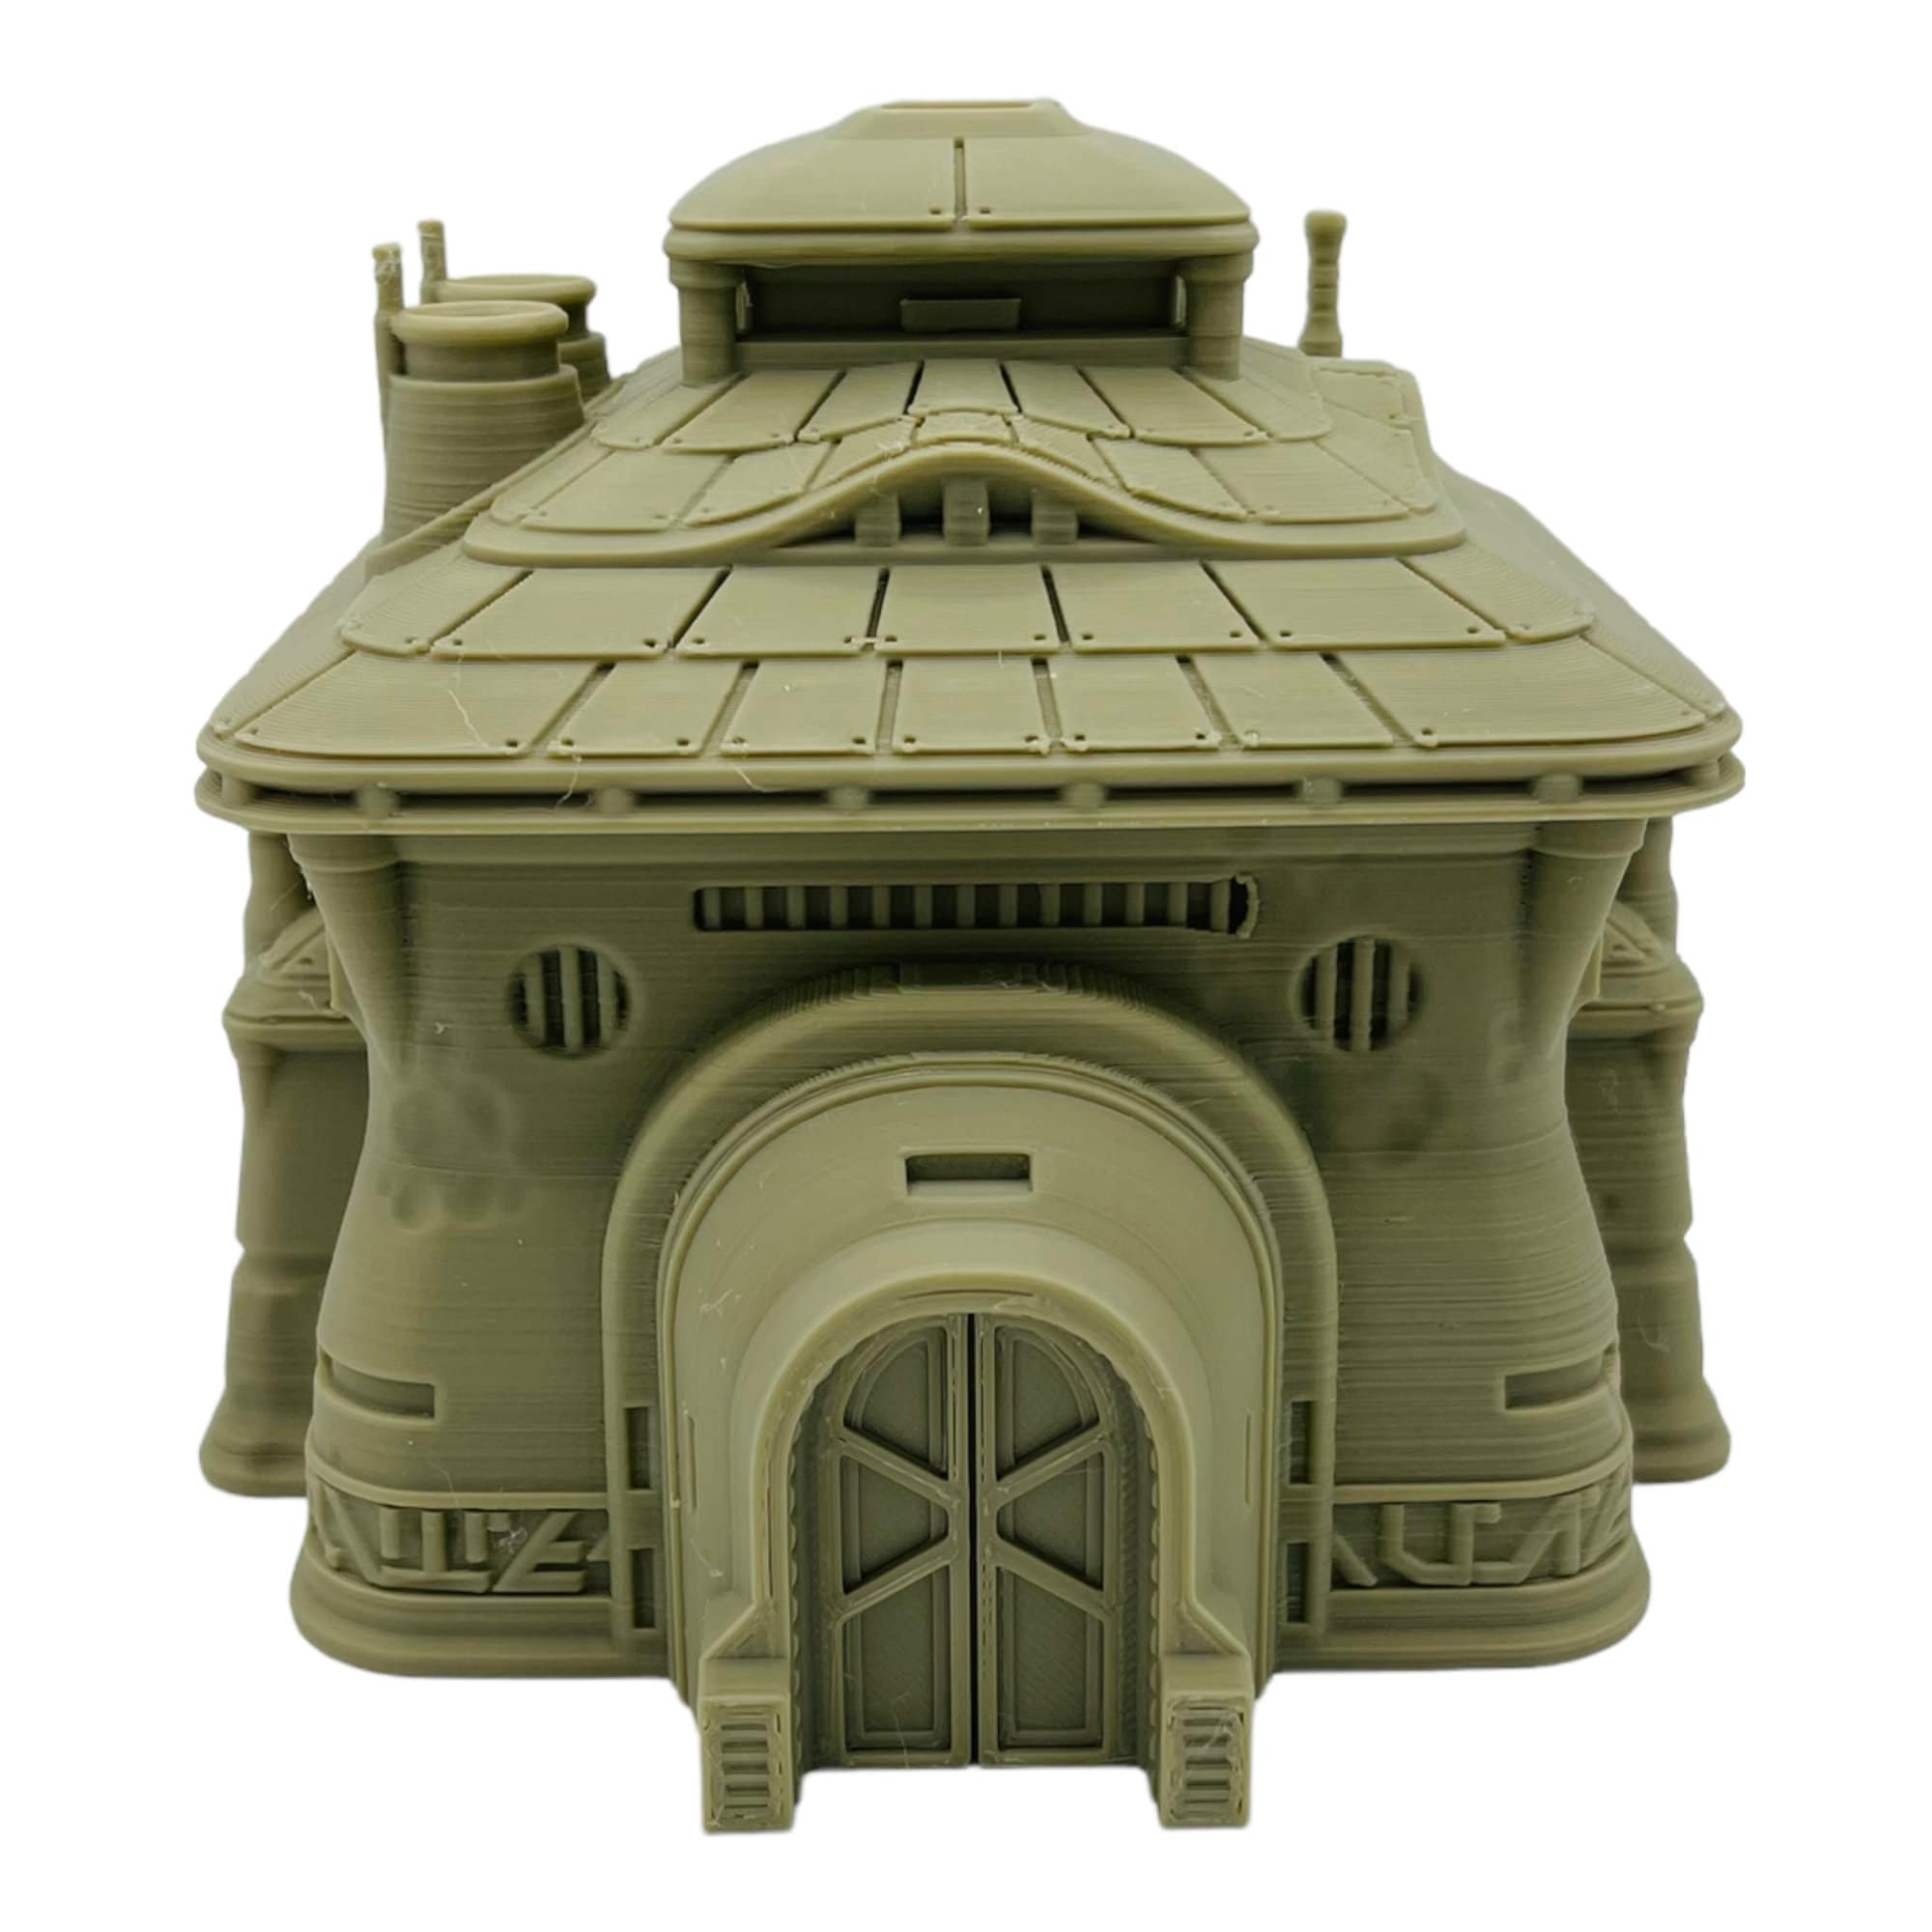 Massa'dun Countryside House / Designed by War Scenery / Legion and Sci-Fi 3d Printed Tabletop Terrain / Licensed Printer